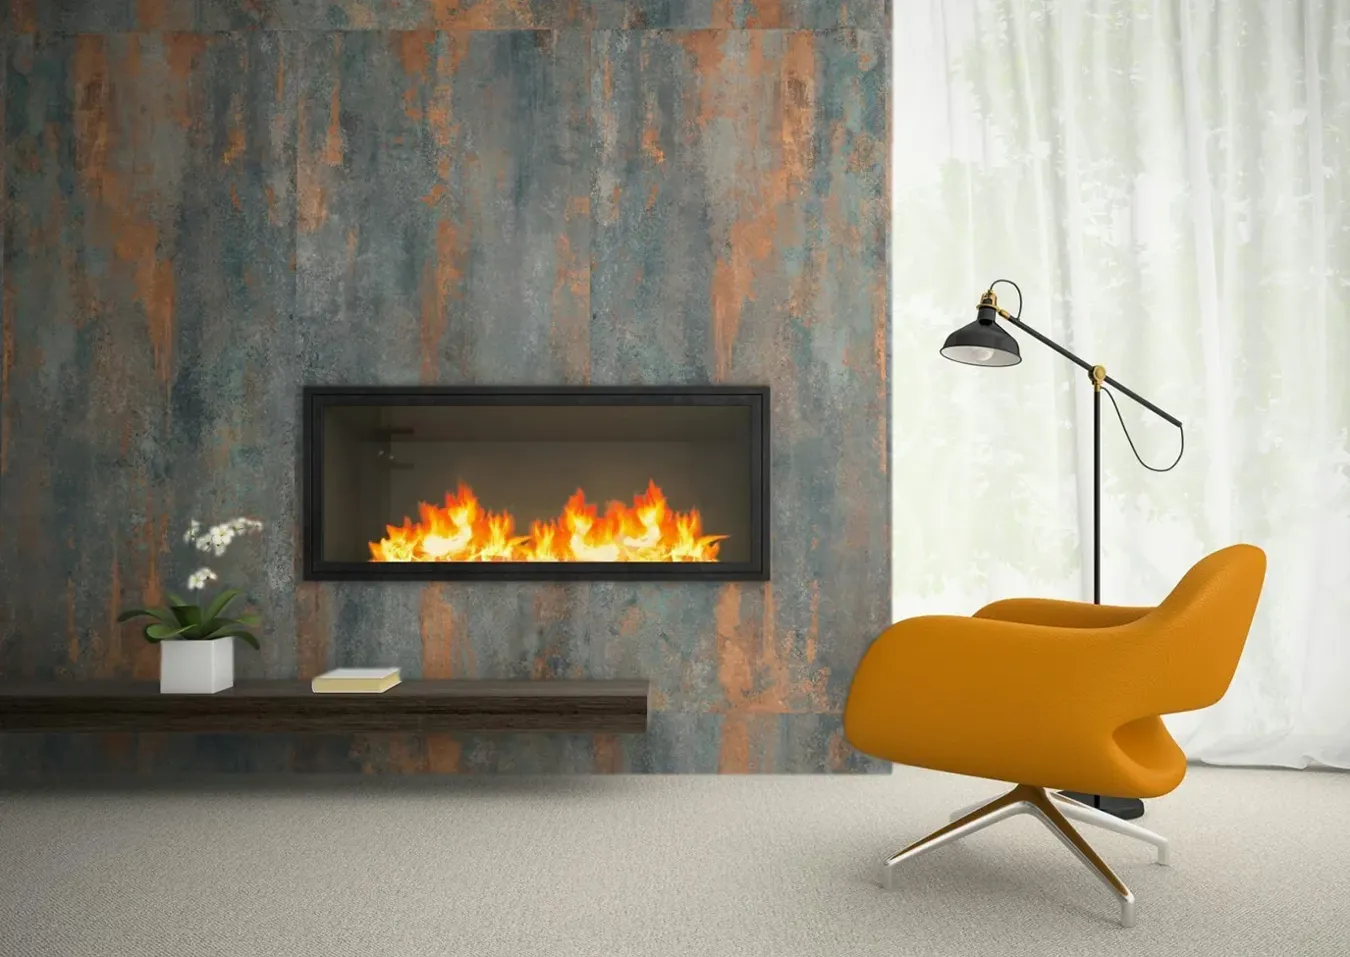 Cozy living room with fireplace in metal effect tiles, modern yellow armchair, and chic floor lamp